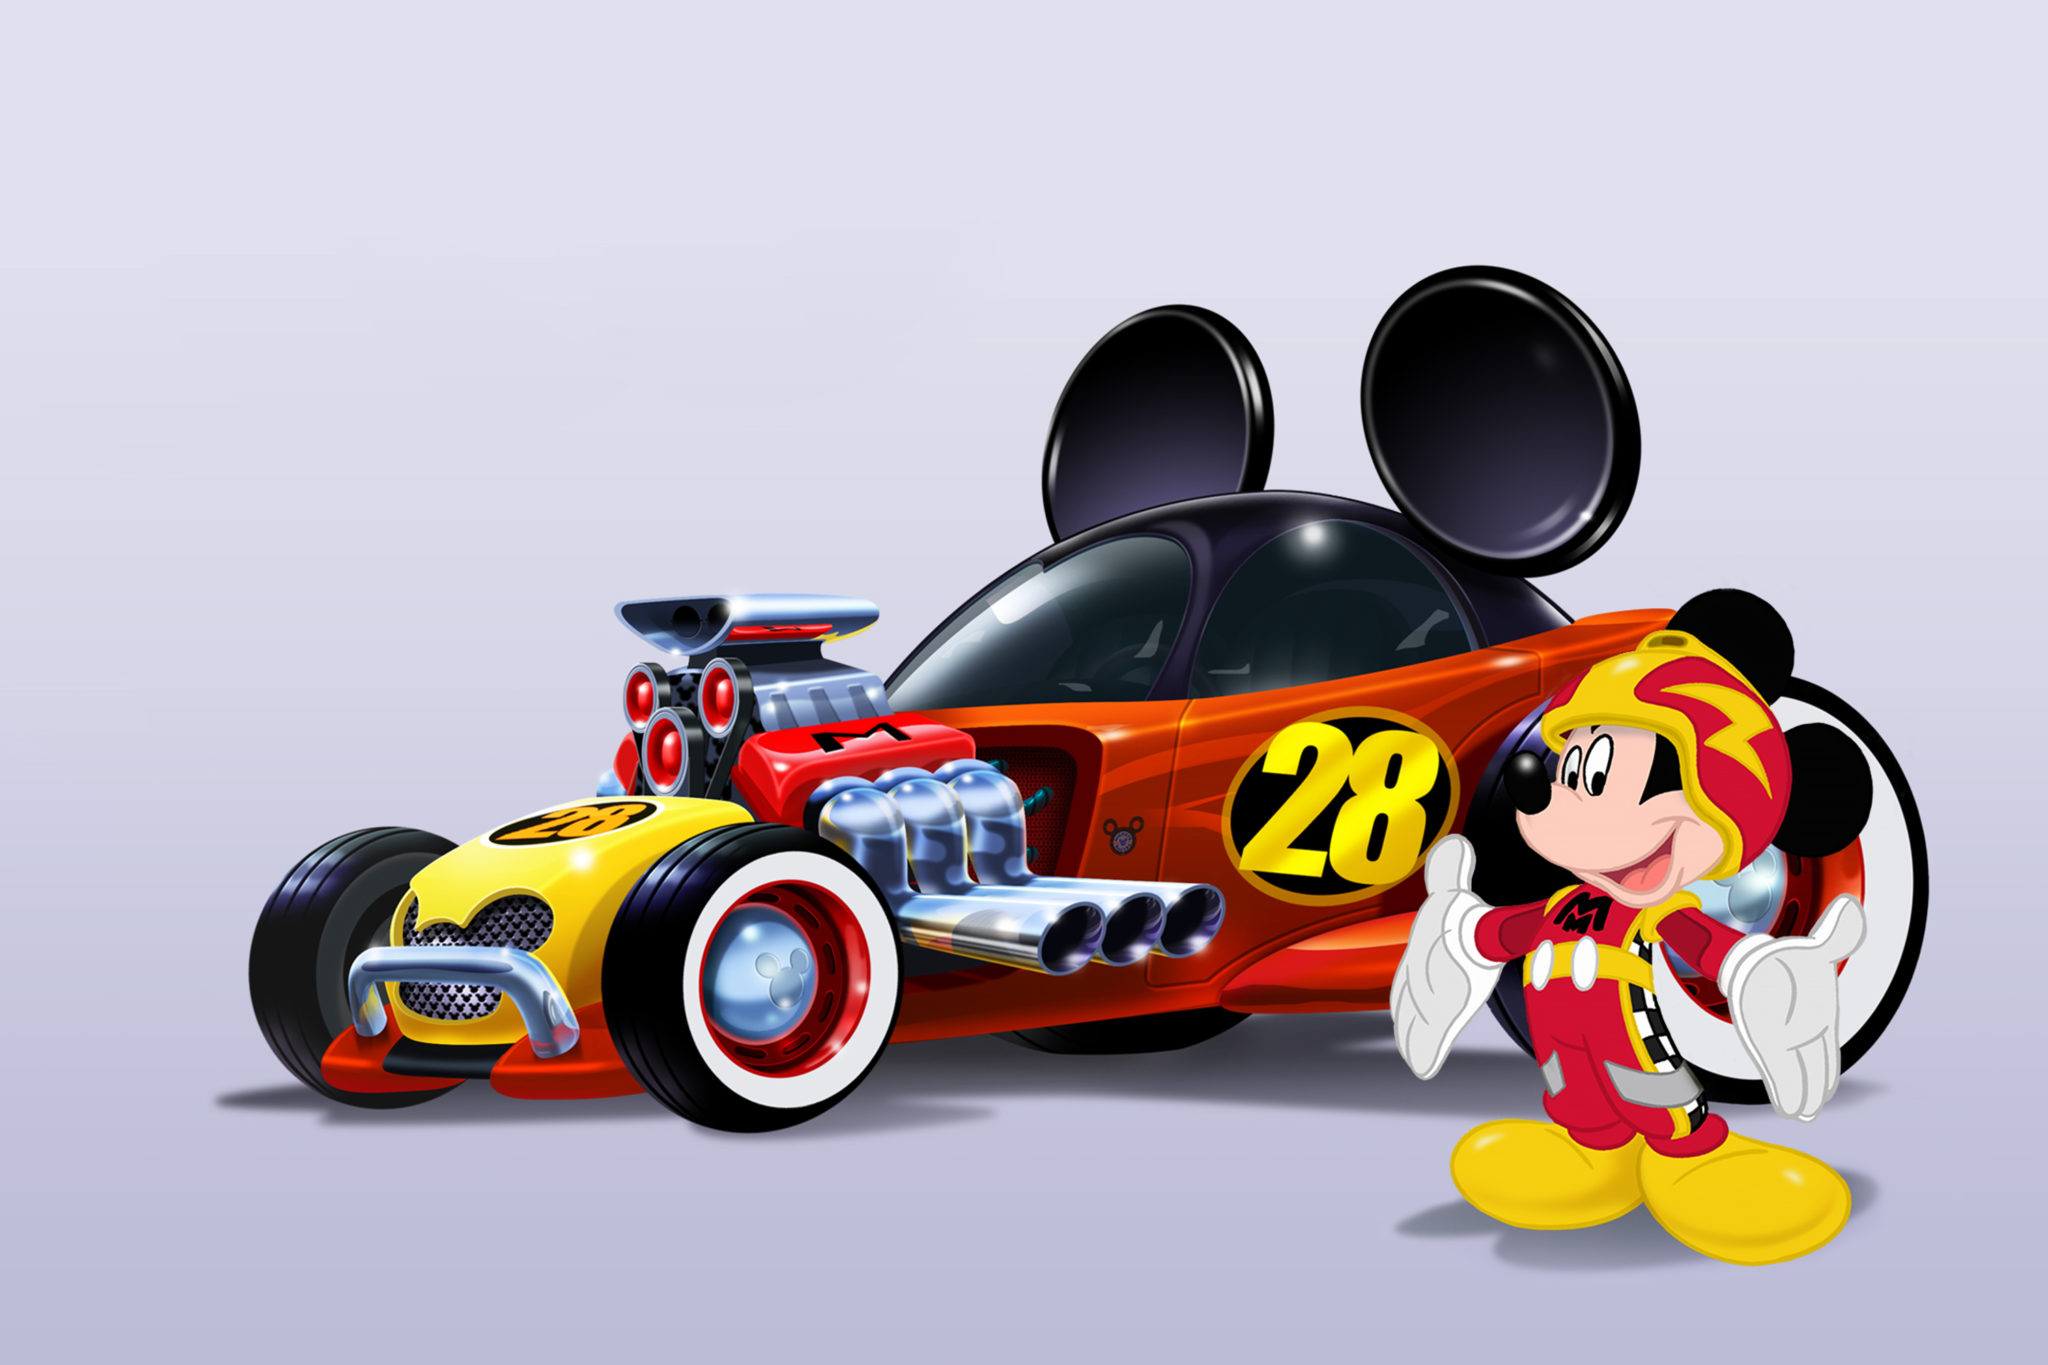 ‘Disney Junior at the Movies’ be the First to See the New Series Mickey and the Roadster Racers, in theaters for One Day